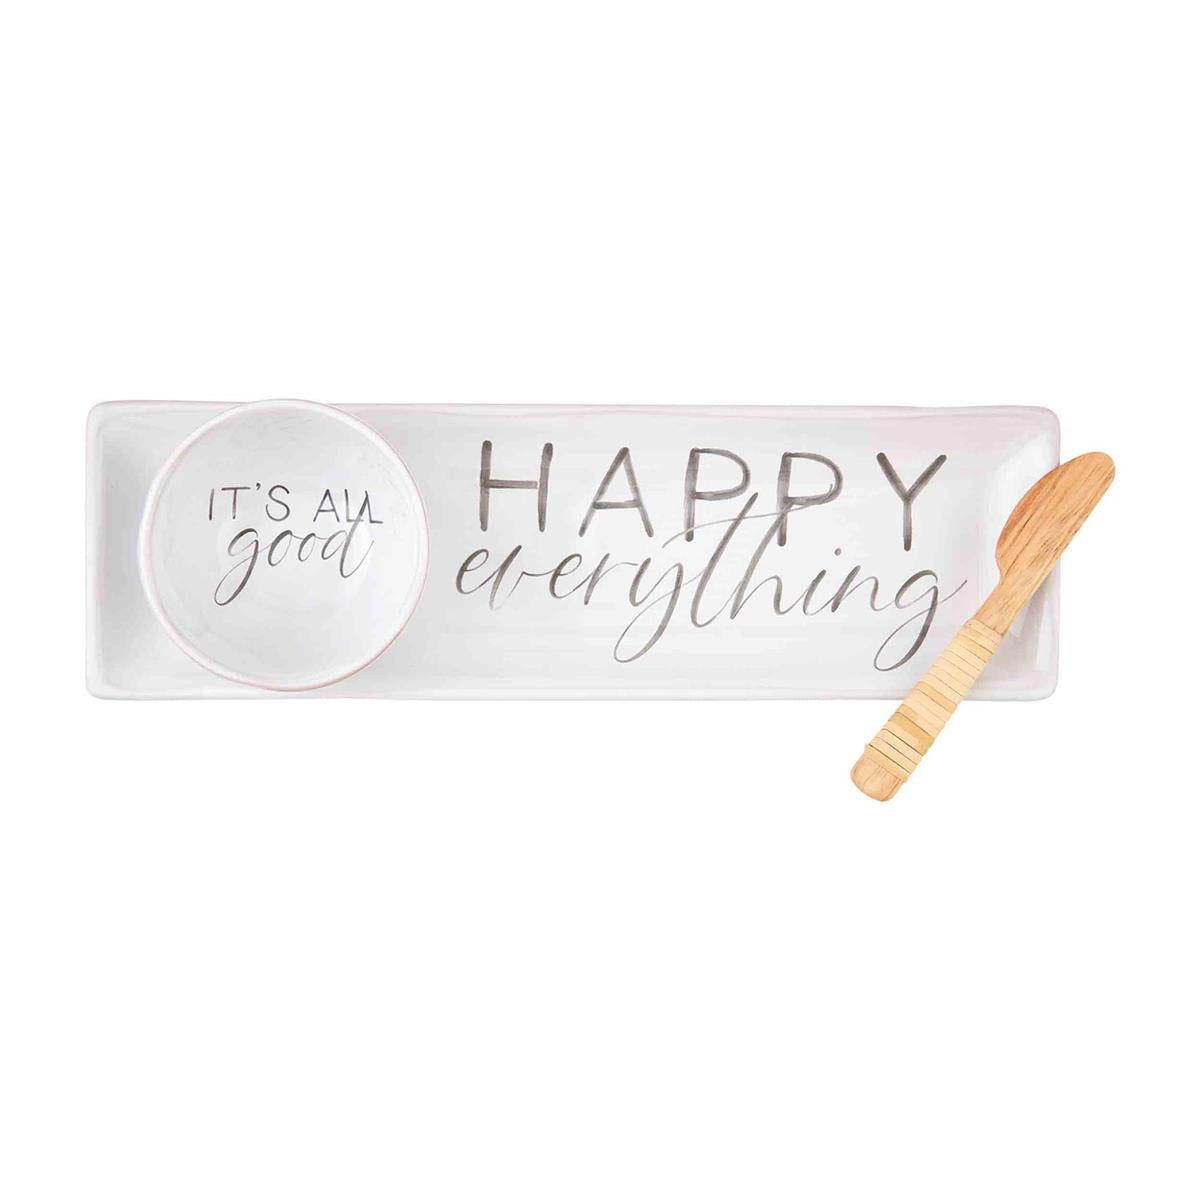 happy everything tray and dip set displayed on a white background